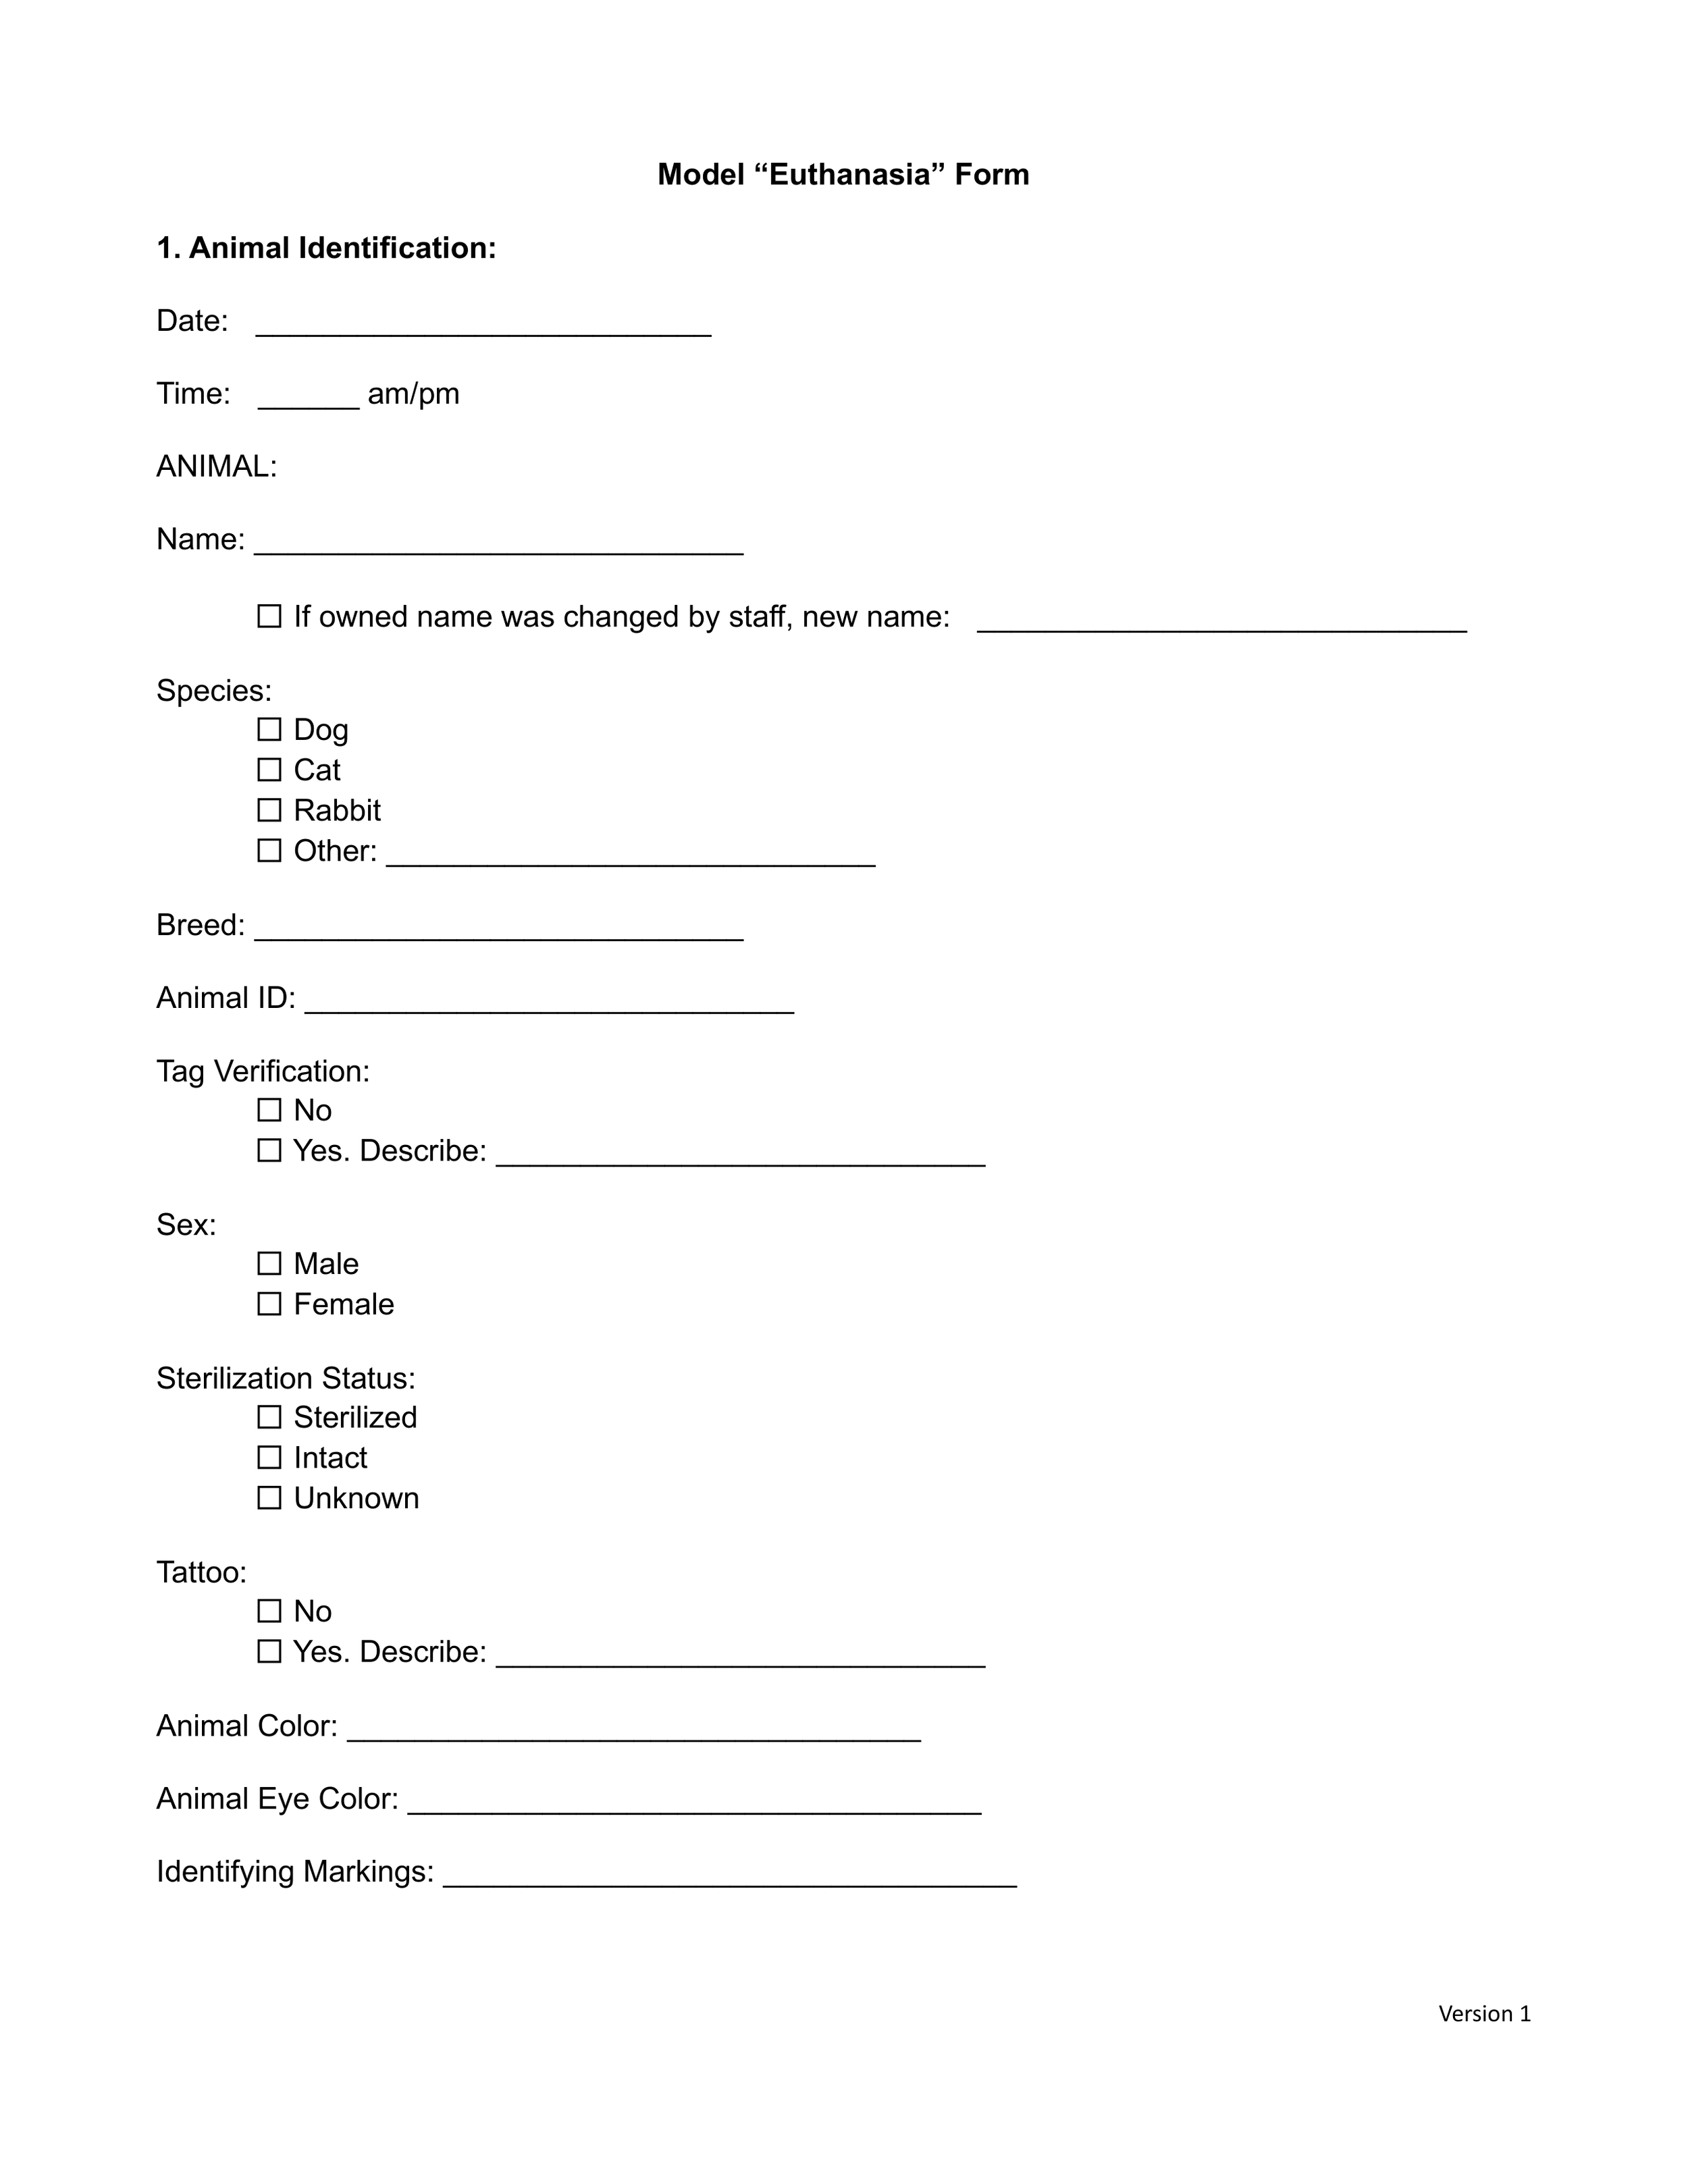 Model Euthanasia Form.png